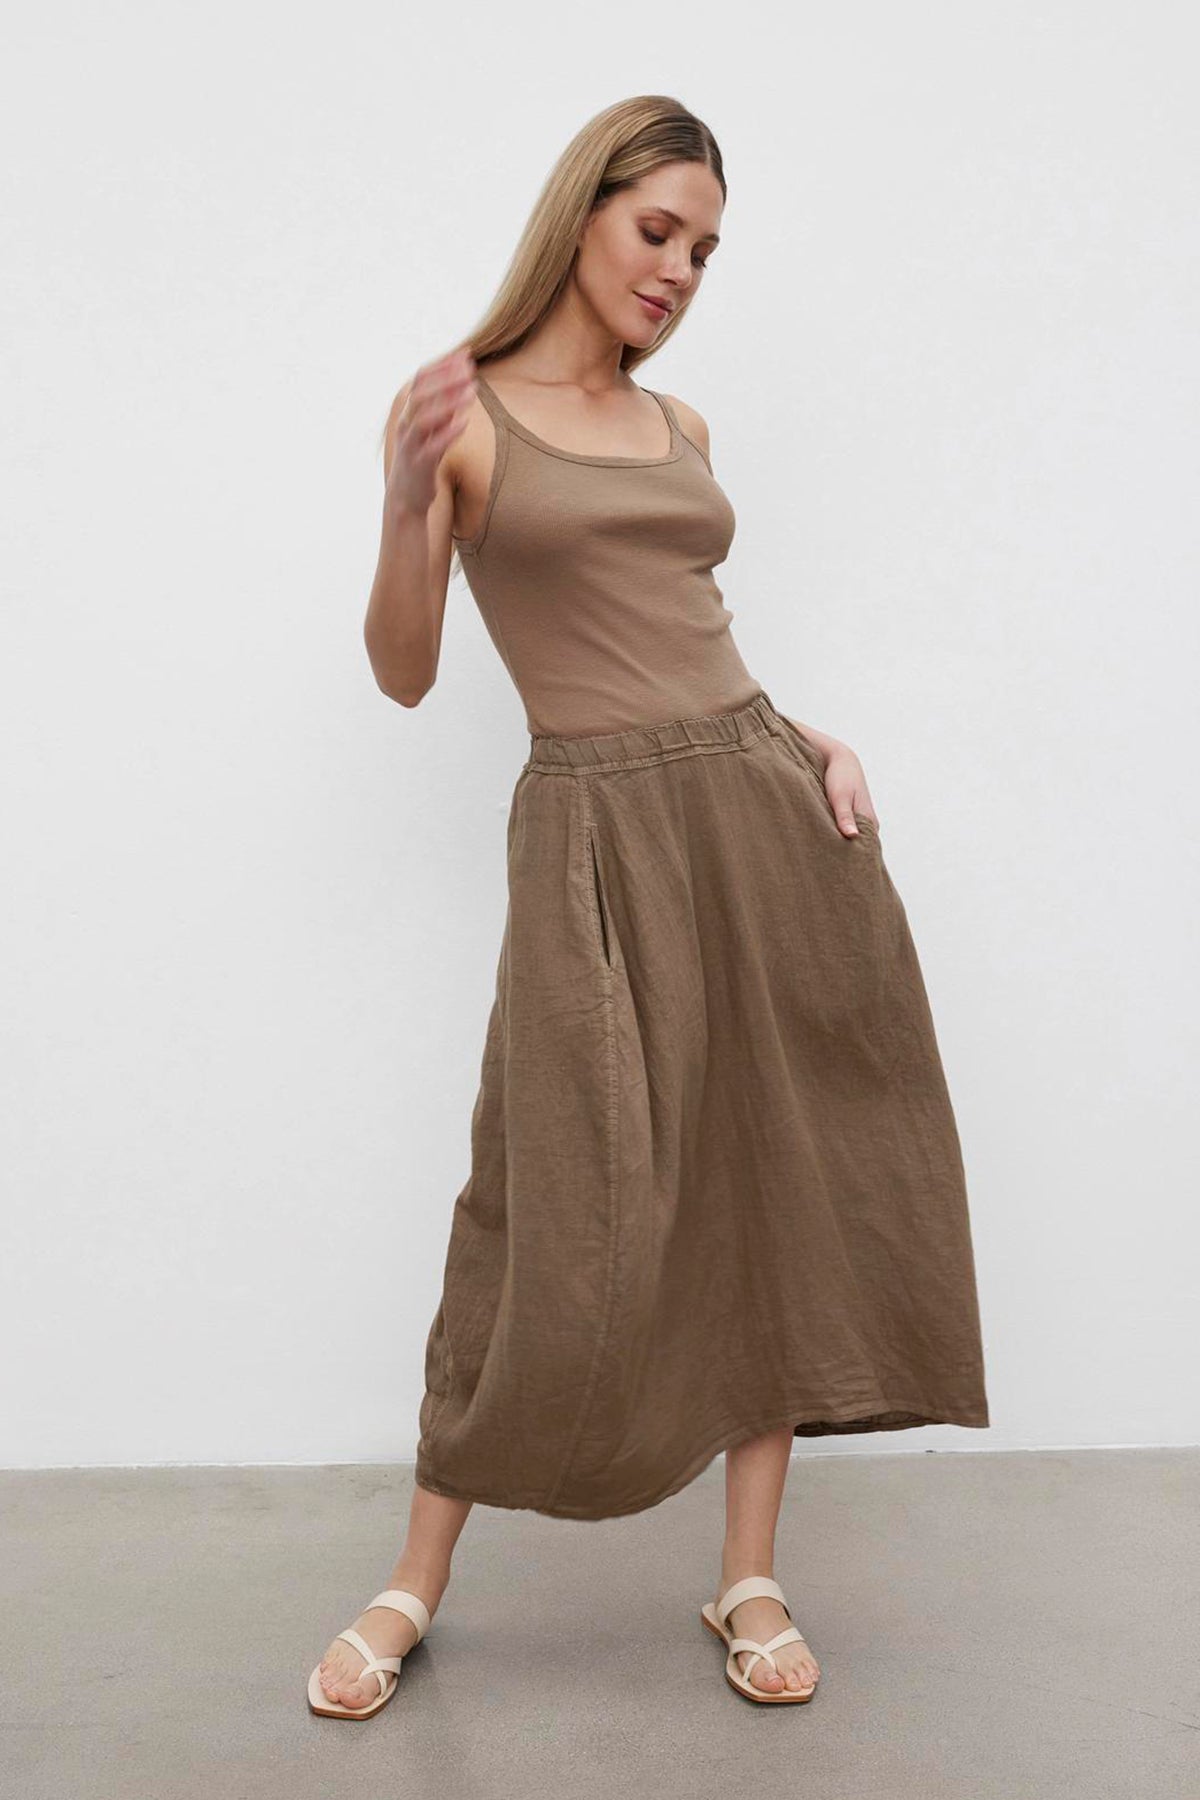   A woman in a sleeveless top and the Velvet by Graham & Spencer FAE Linen A-line skirt with an elastic waistband posing against a plain background. 